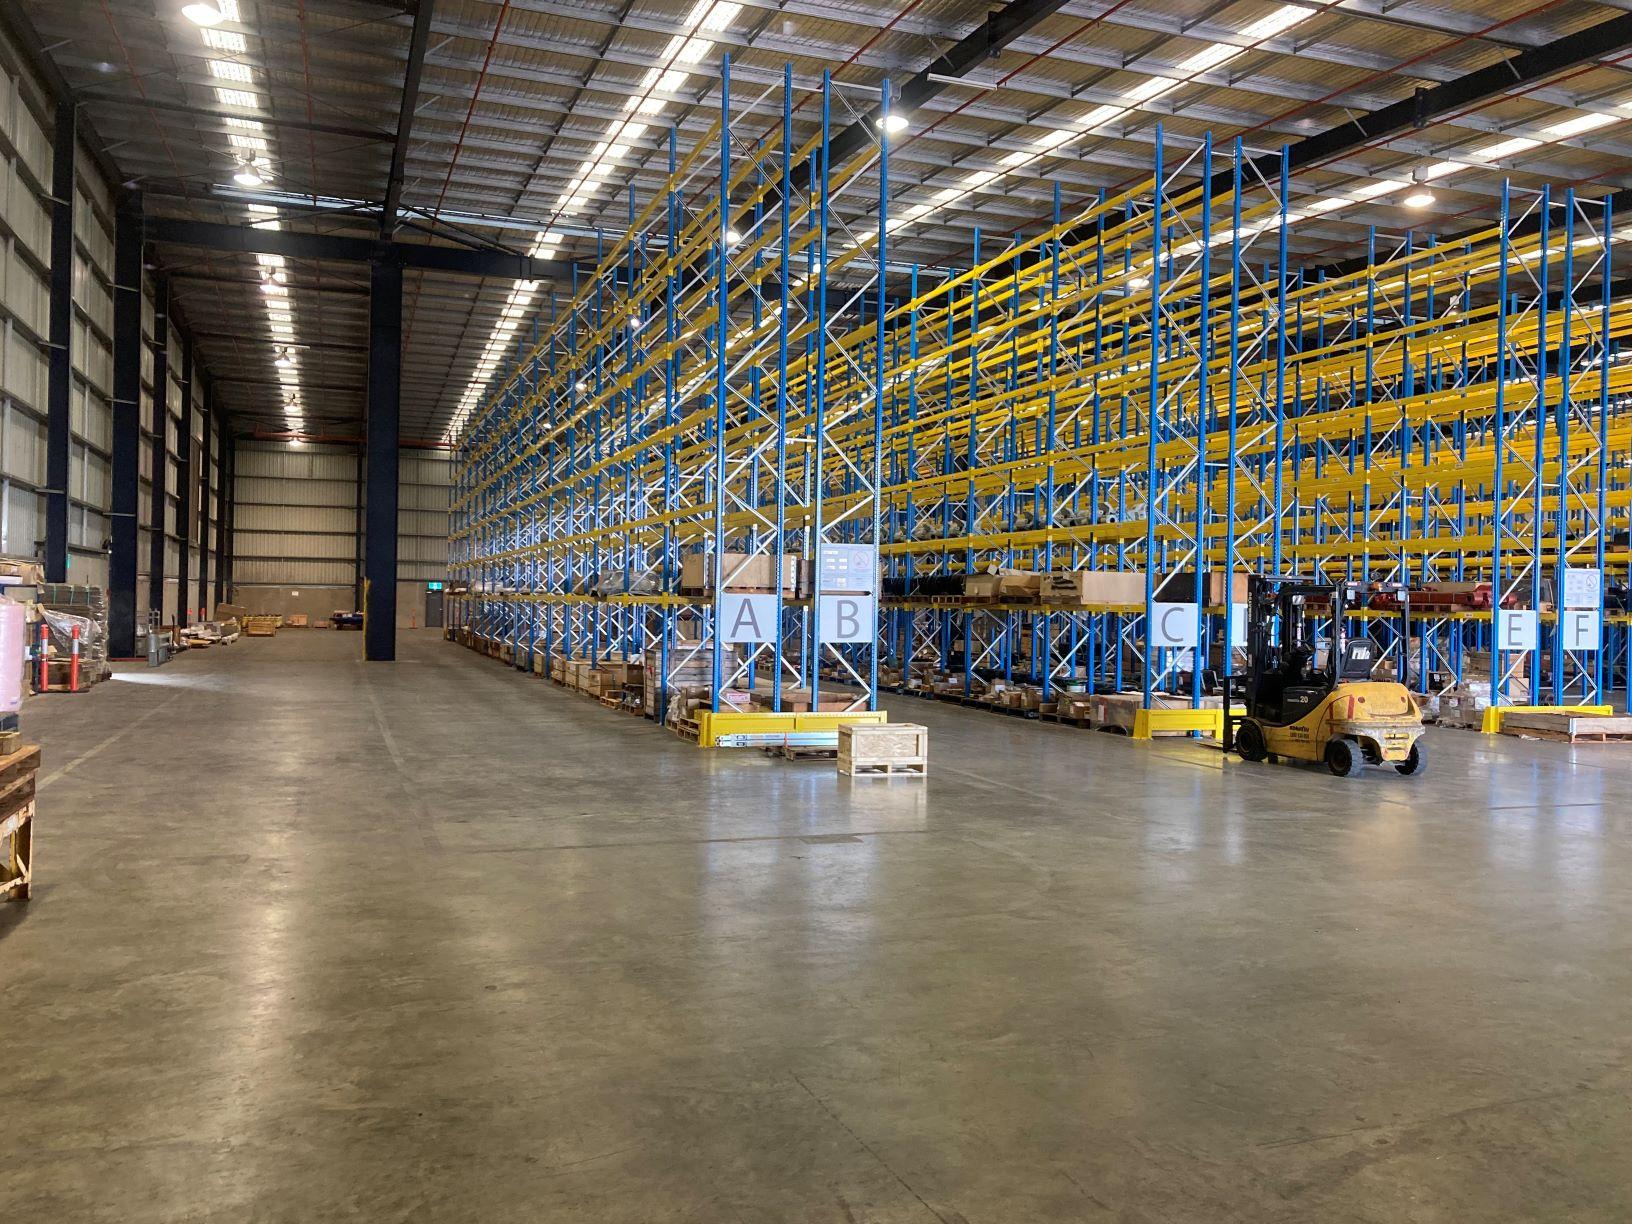 New logistics facility opened at the Port of Brisbane.